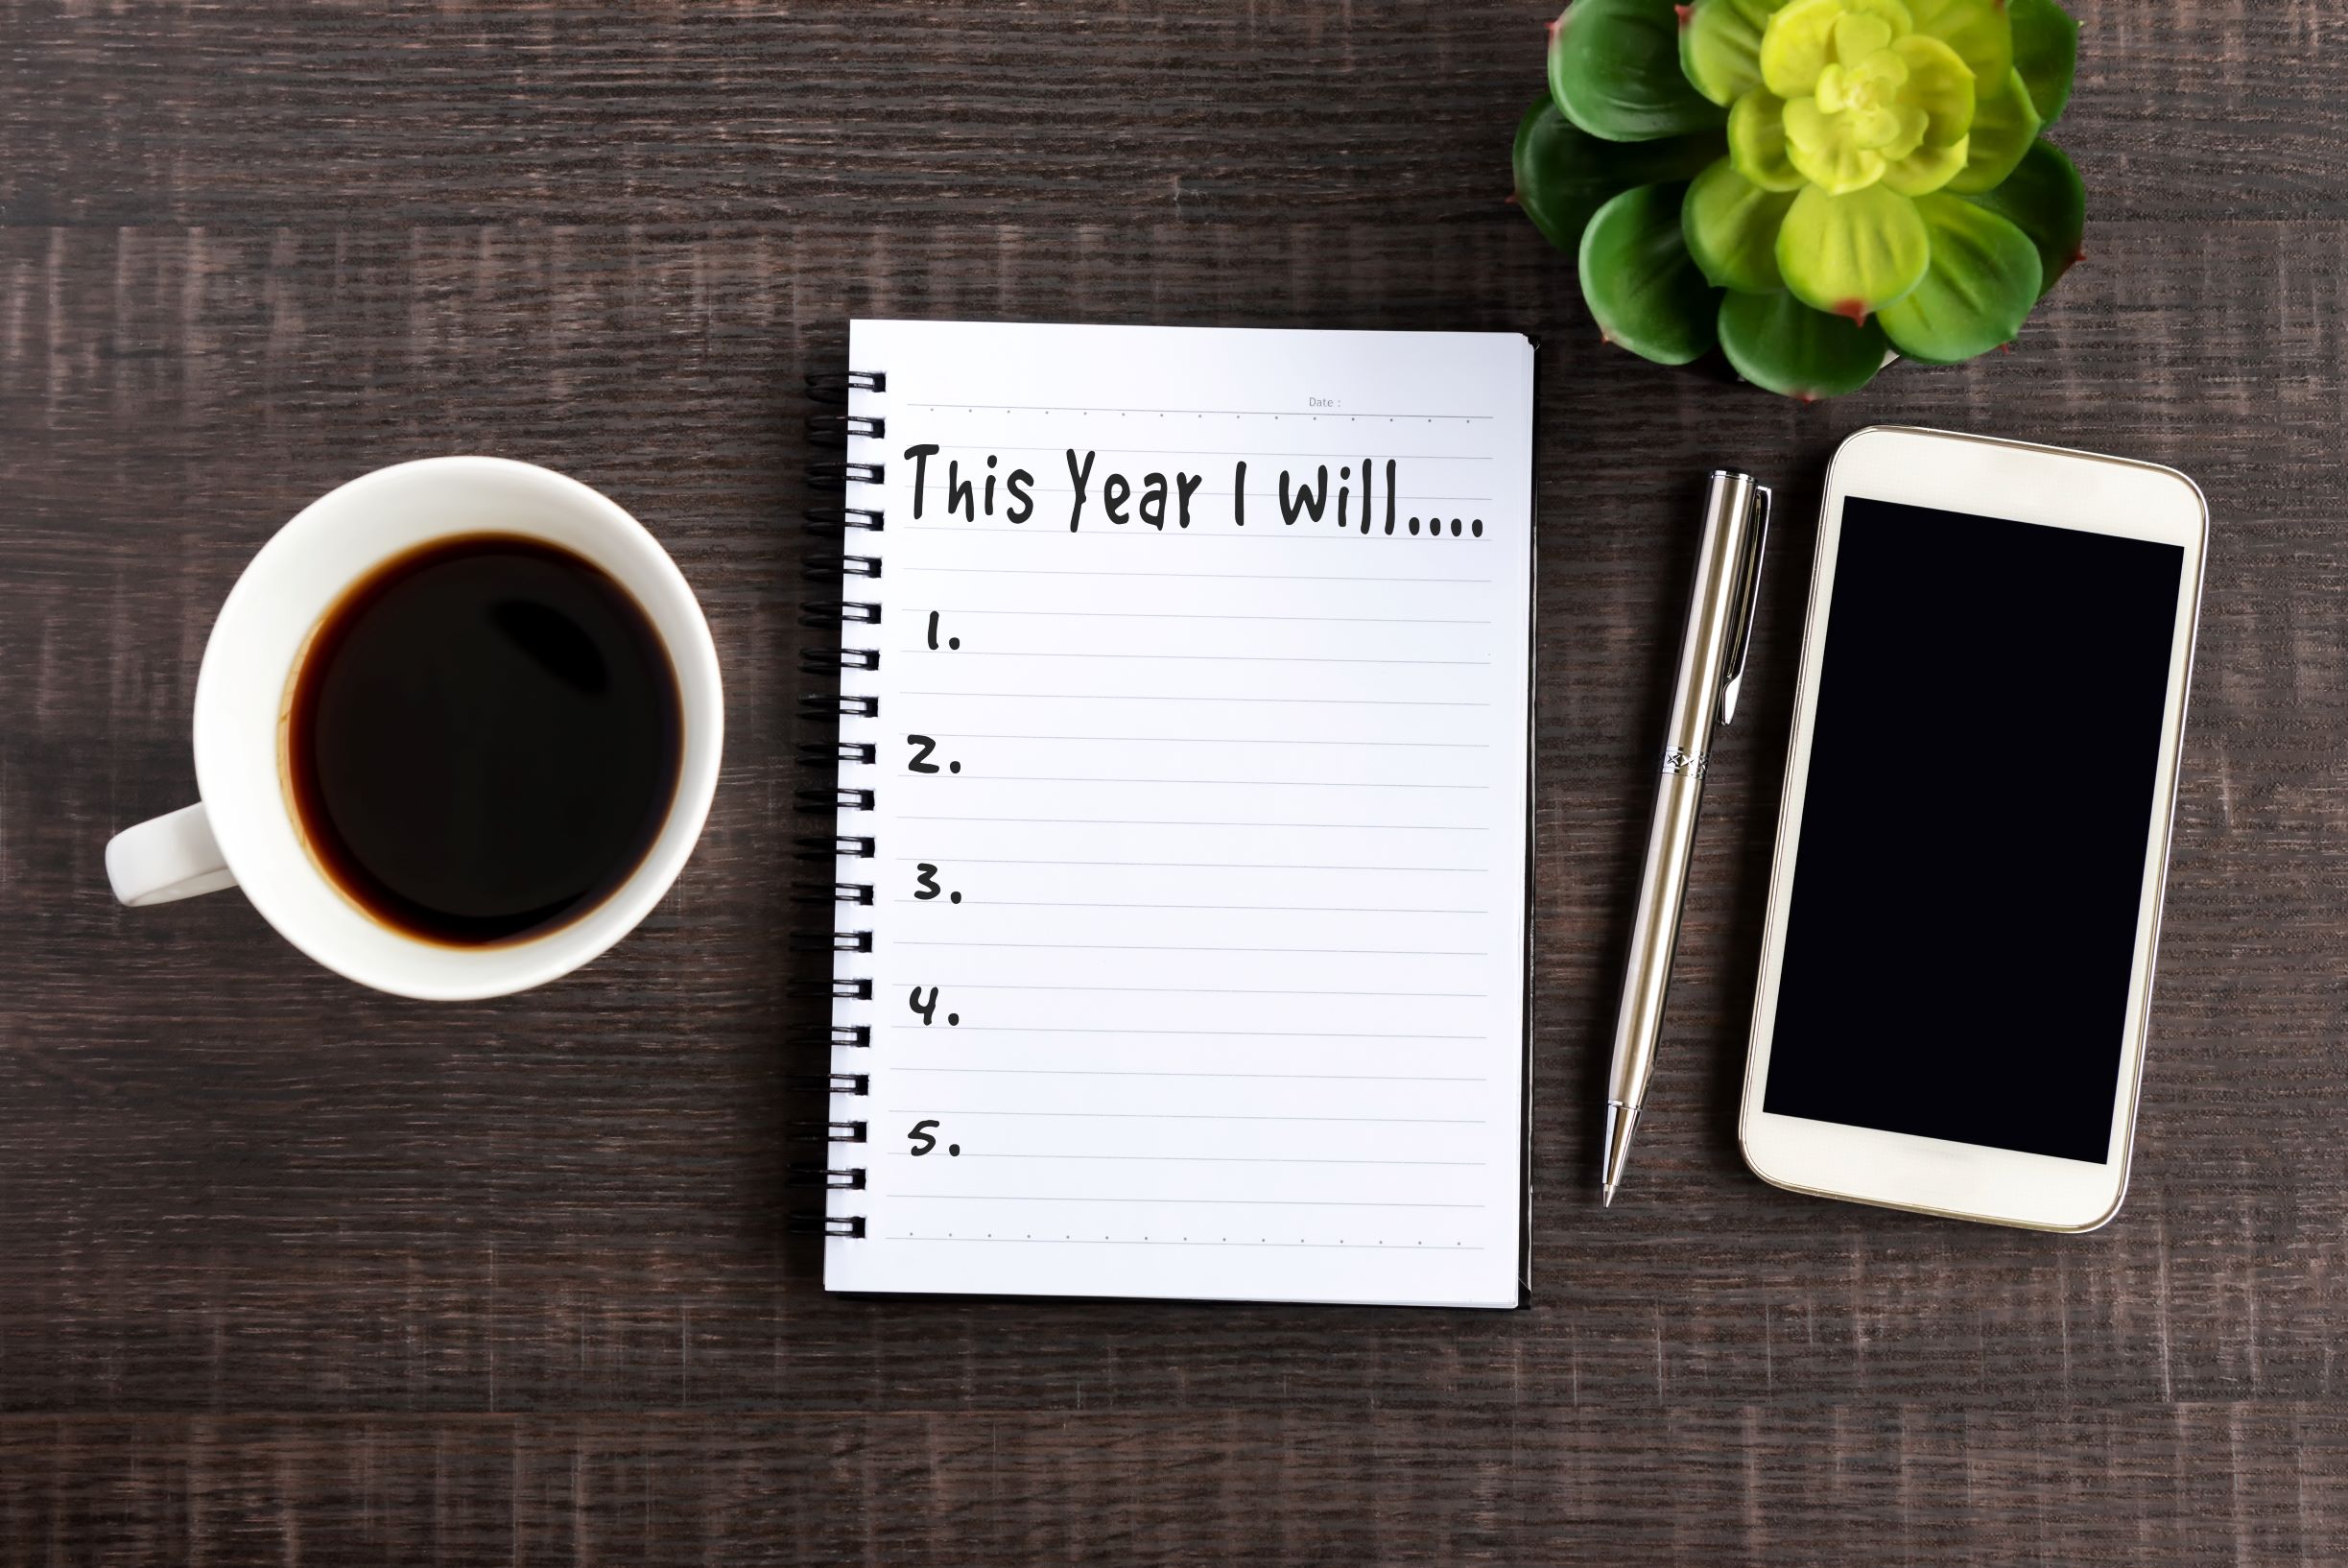 Resolutions or Goals? Here are 7 Ideas to Jumpstart Your Year.